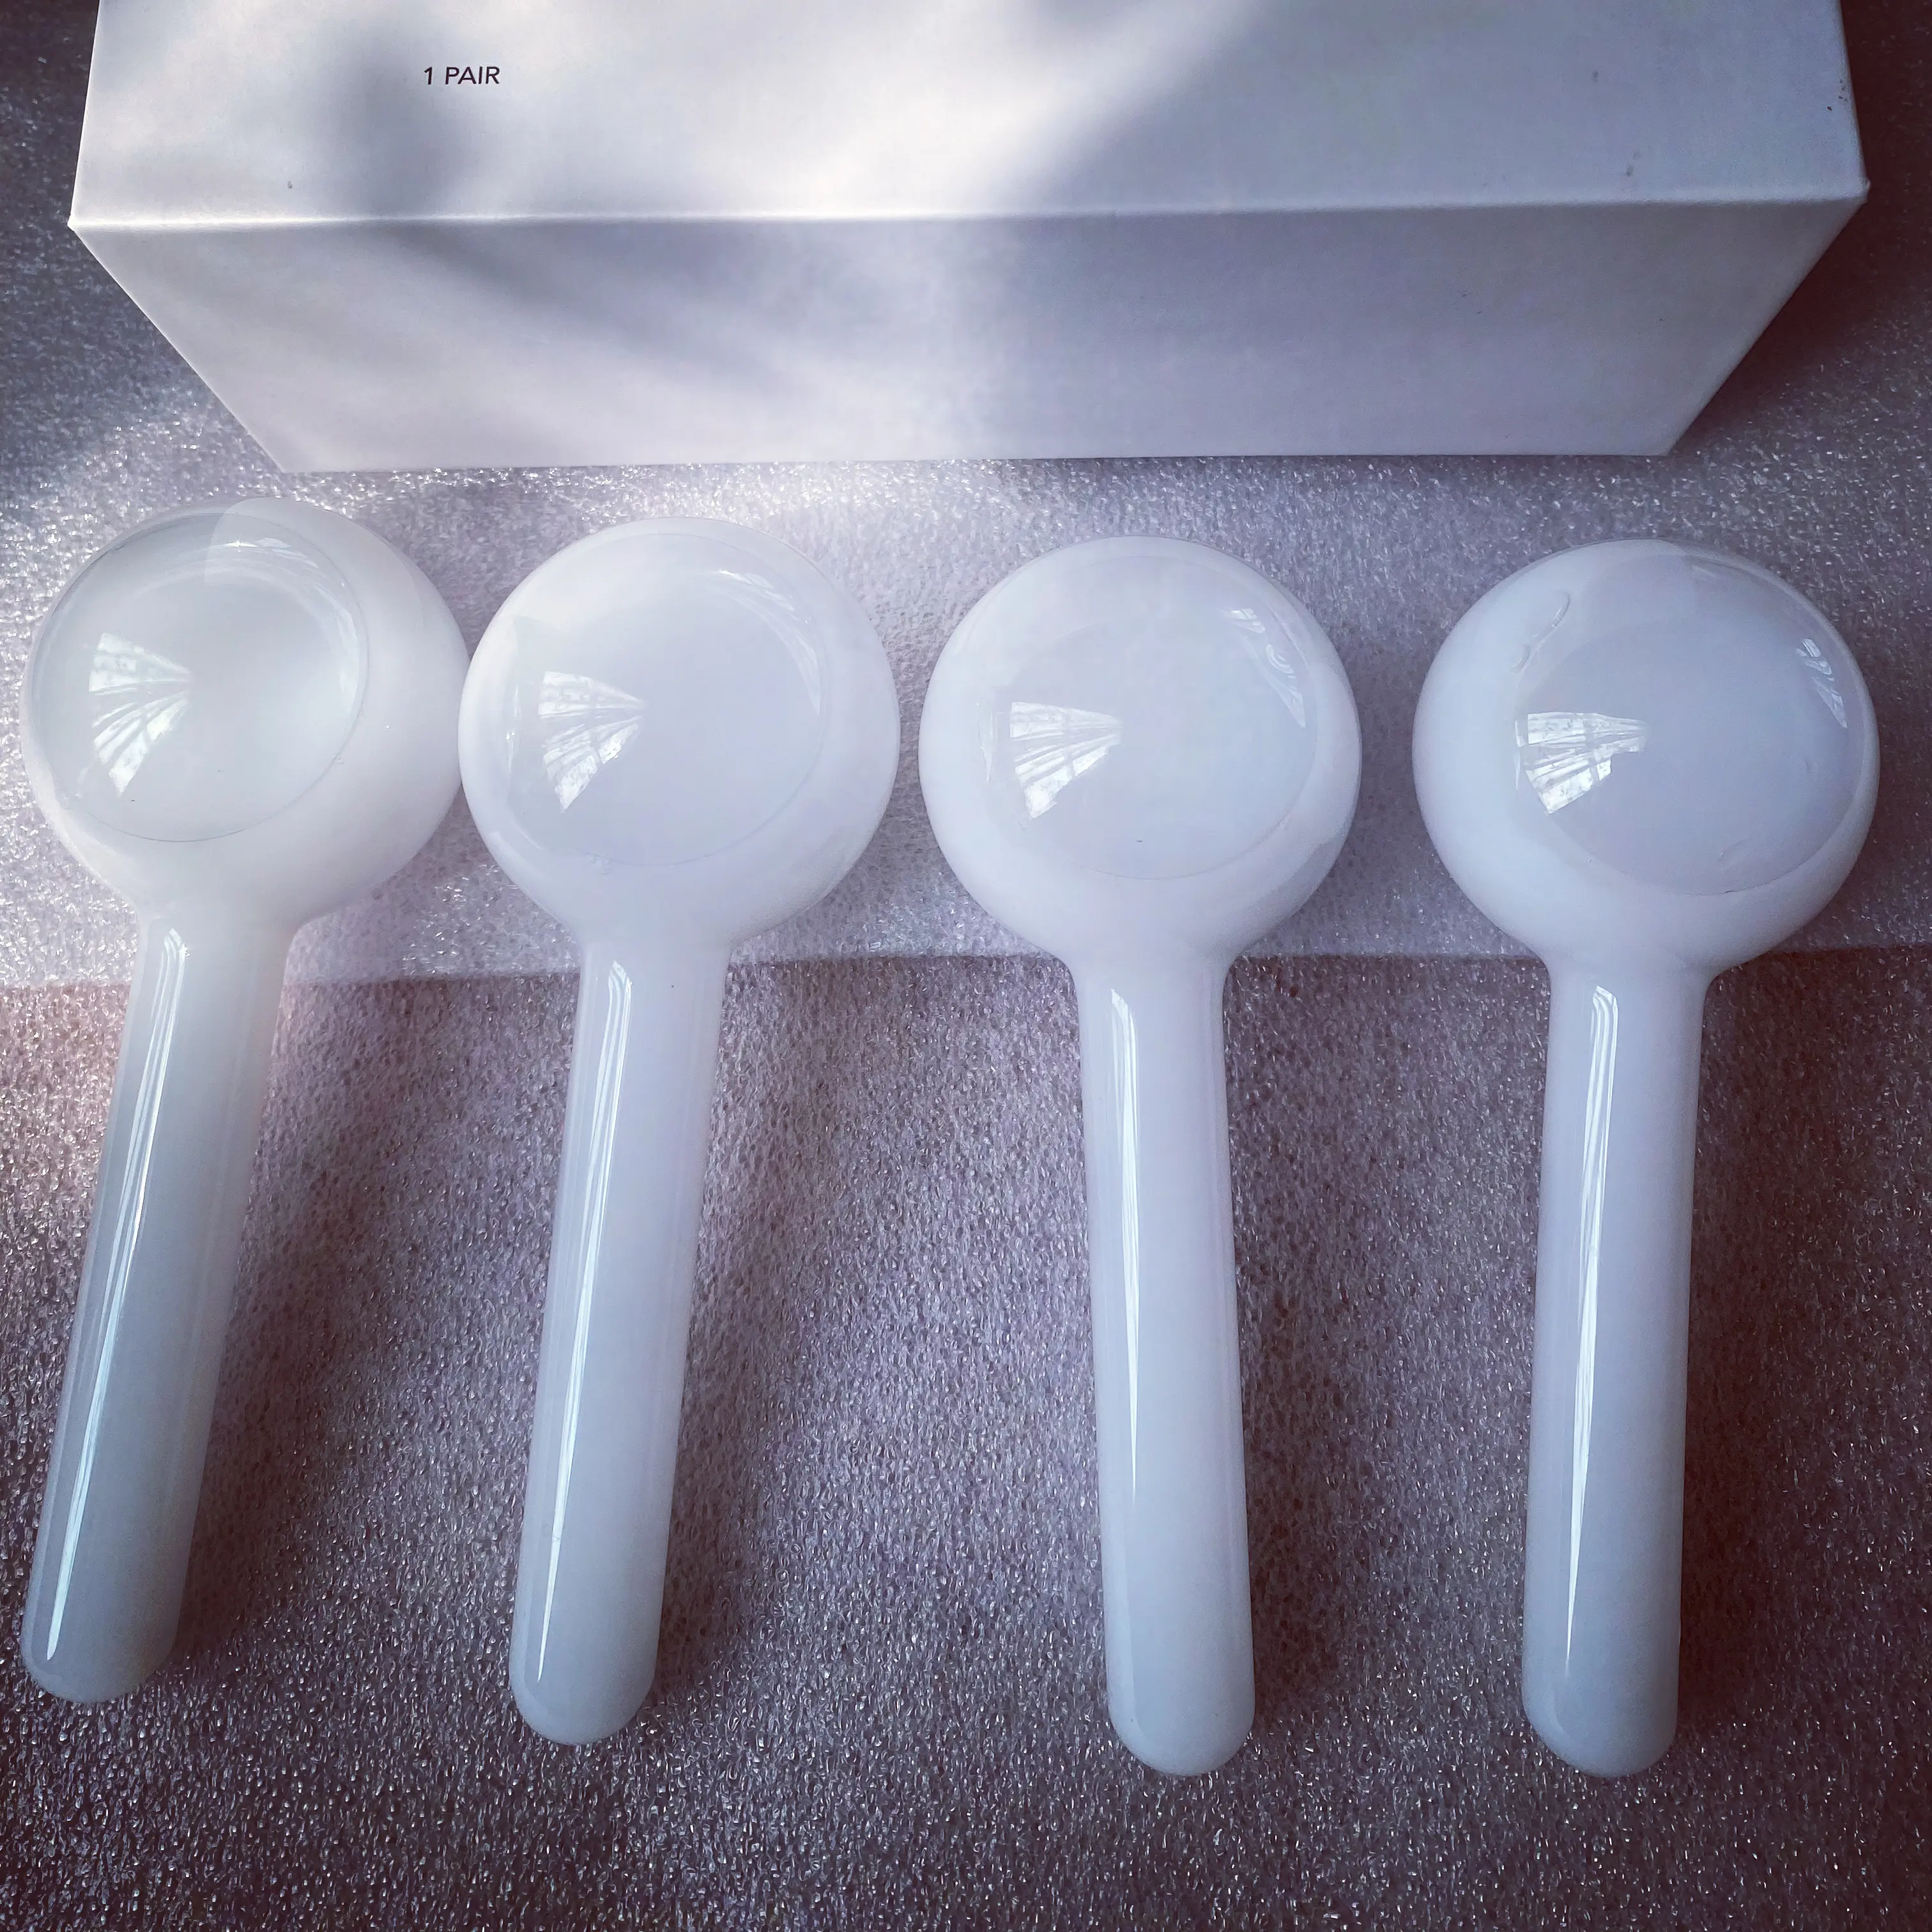 Magic ice globes facial roller brown and white facial globes packing 2 pairs each gift box